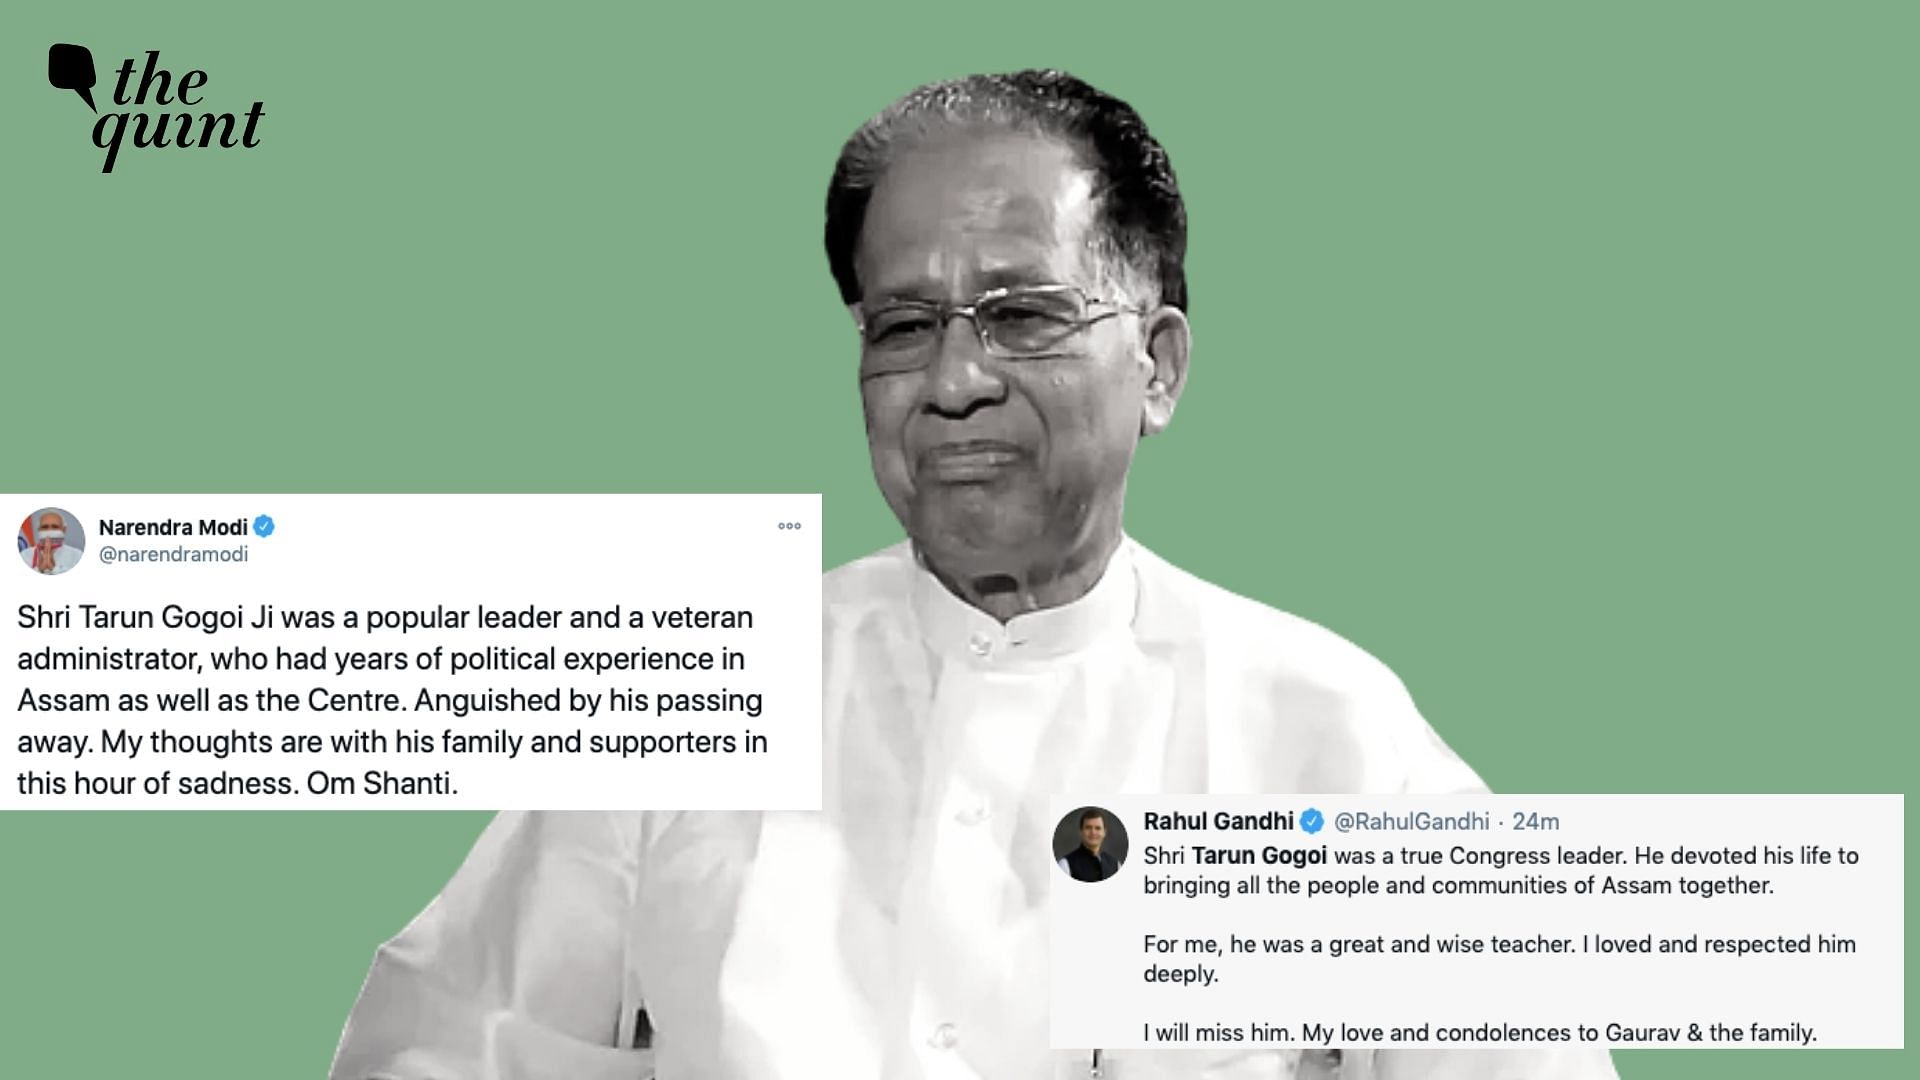 Former chief minister and veteran Congress leader from Assam, <a href="https://www.thequint.com/news/india/tarun-gogoi-former-assam-chief-minister-obituary#read-more">Tarun Gogoi</a>, passed away on Monday, 23 November due to post COVID-19 complications. 